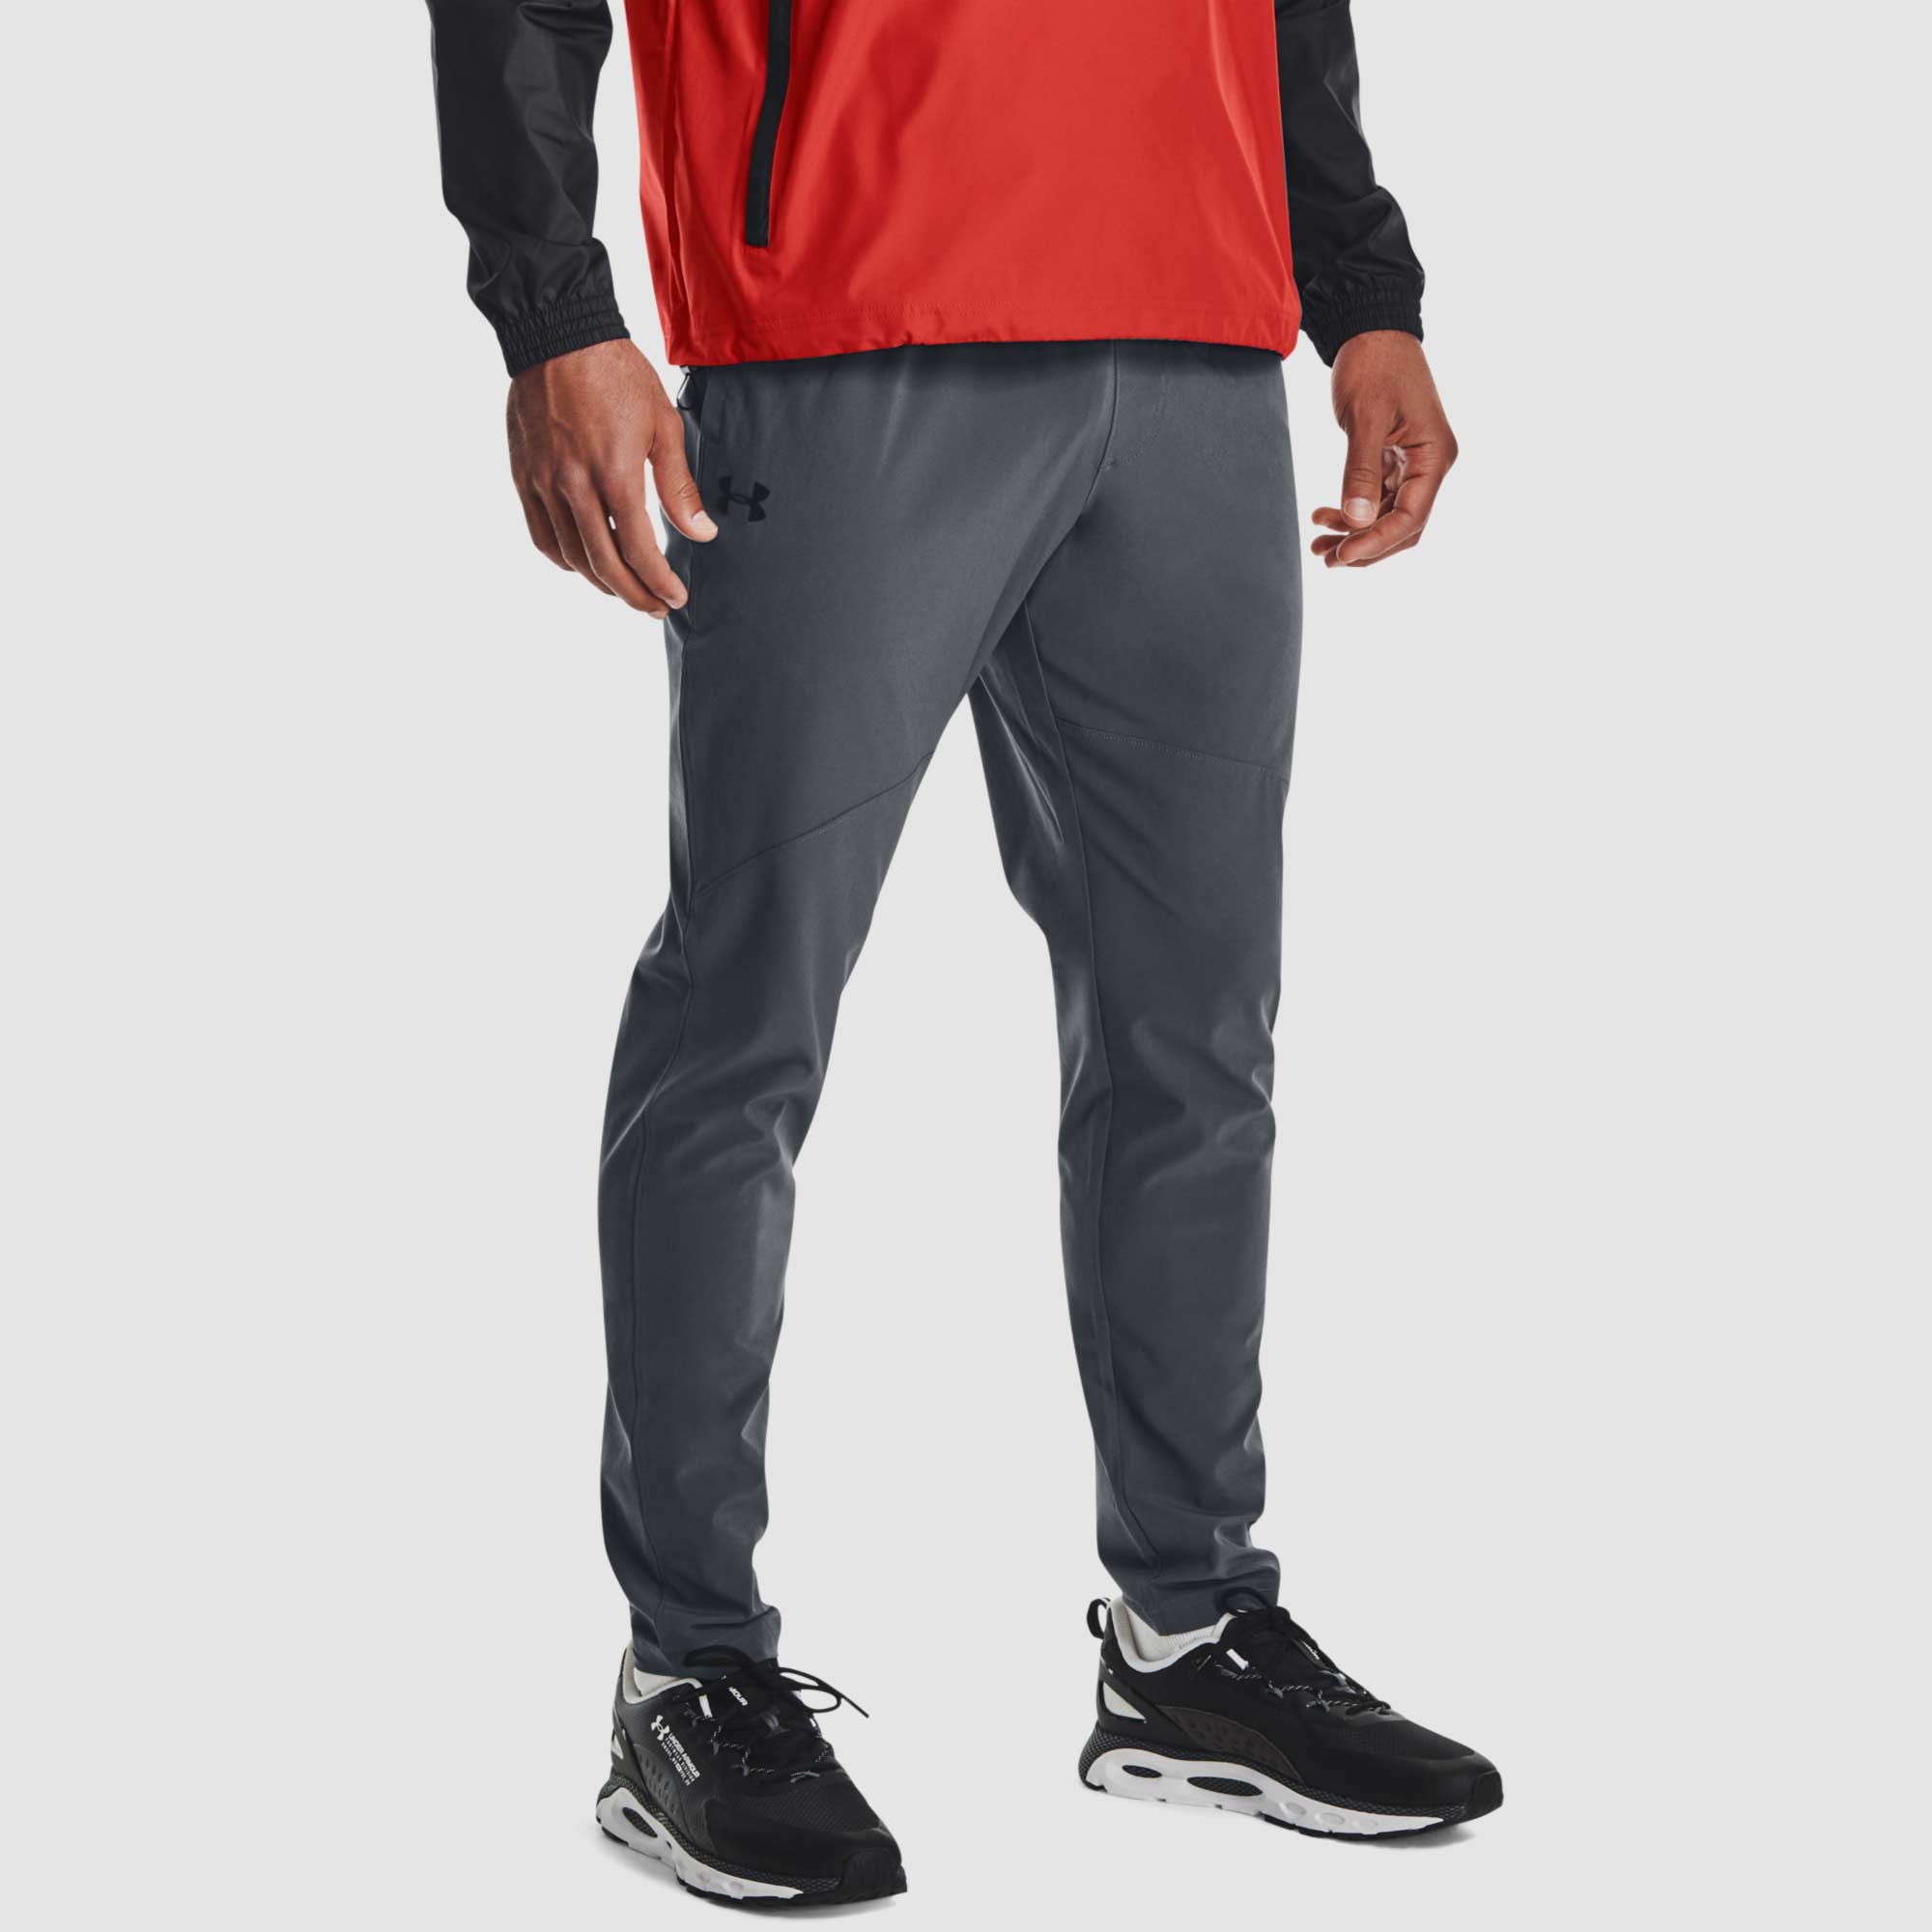 Under Armour Mens Stretch Woven Pant